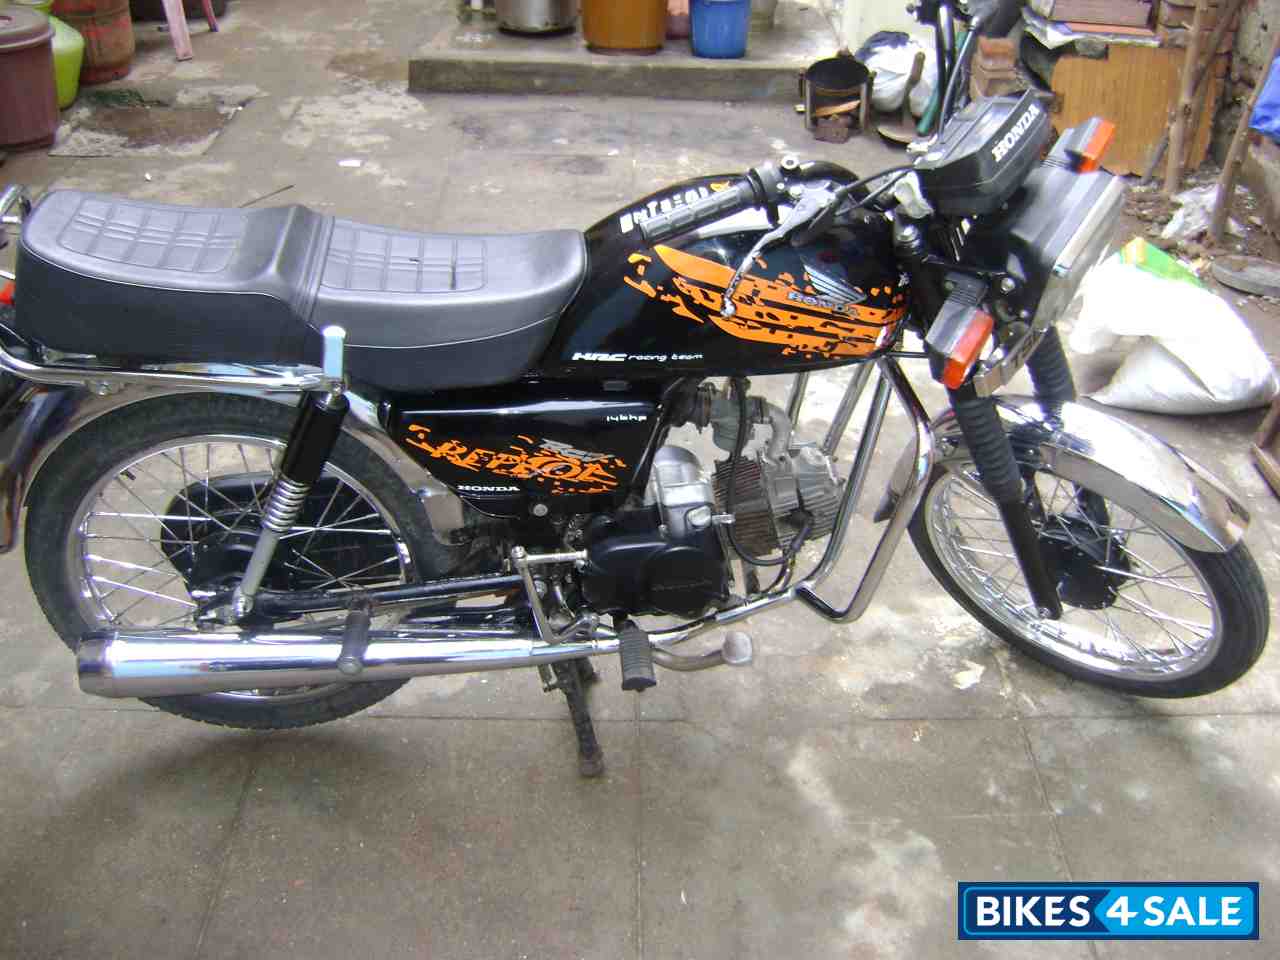 Used Hero Cd 100 For Sale In Chennai Id New Black Colour Bikes4sale